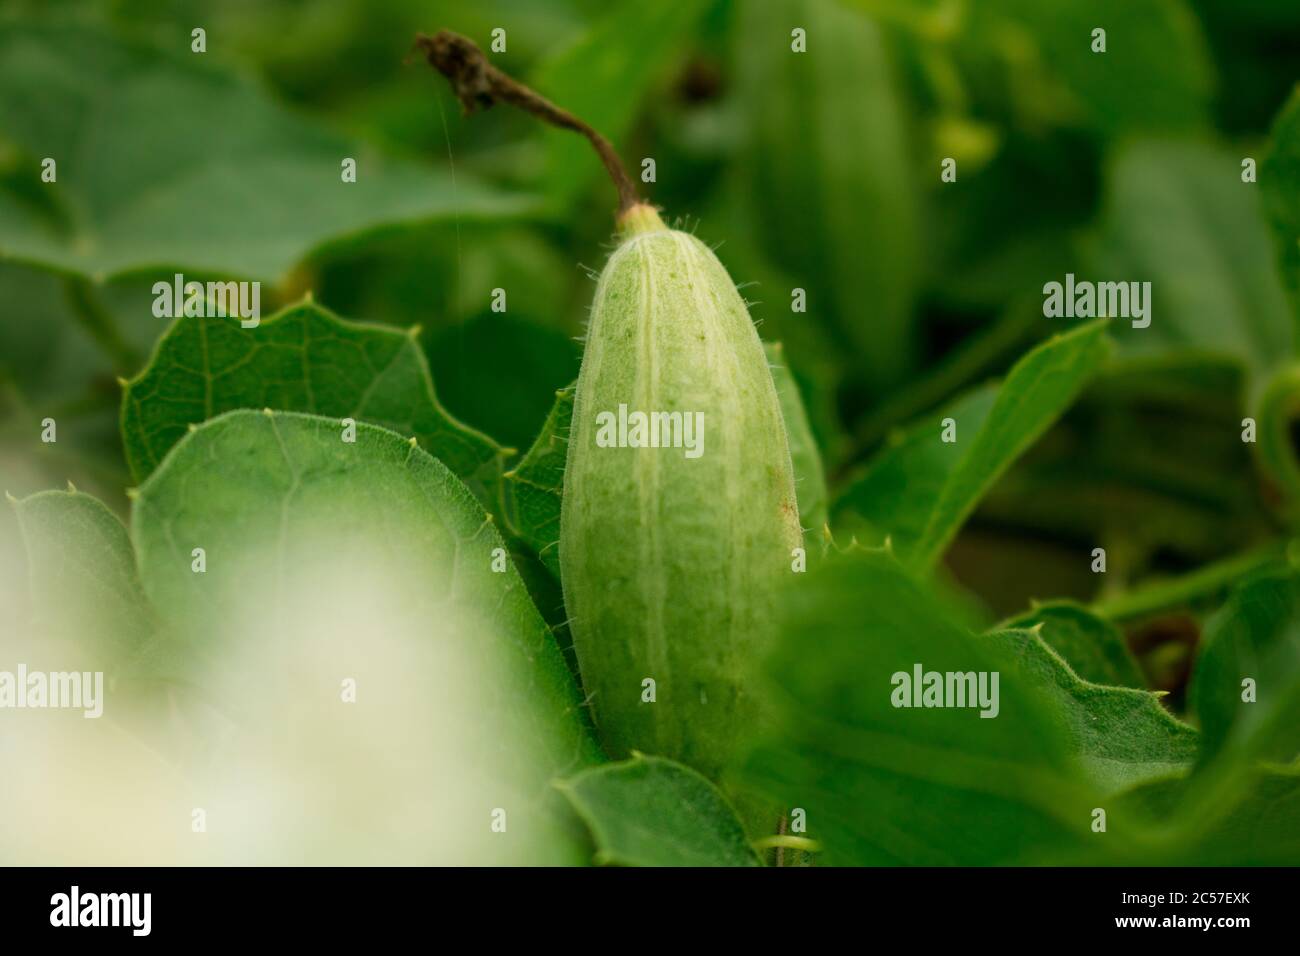 Trichosanthes dioica, also known as pointed gourd, is a vine plant in the family Cucurbitaceae, similar to cucumber and squash, though unlike those it Stock Photo